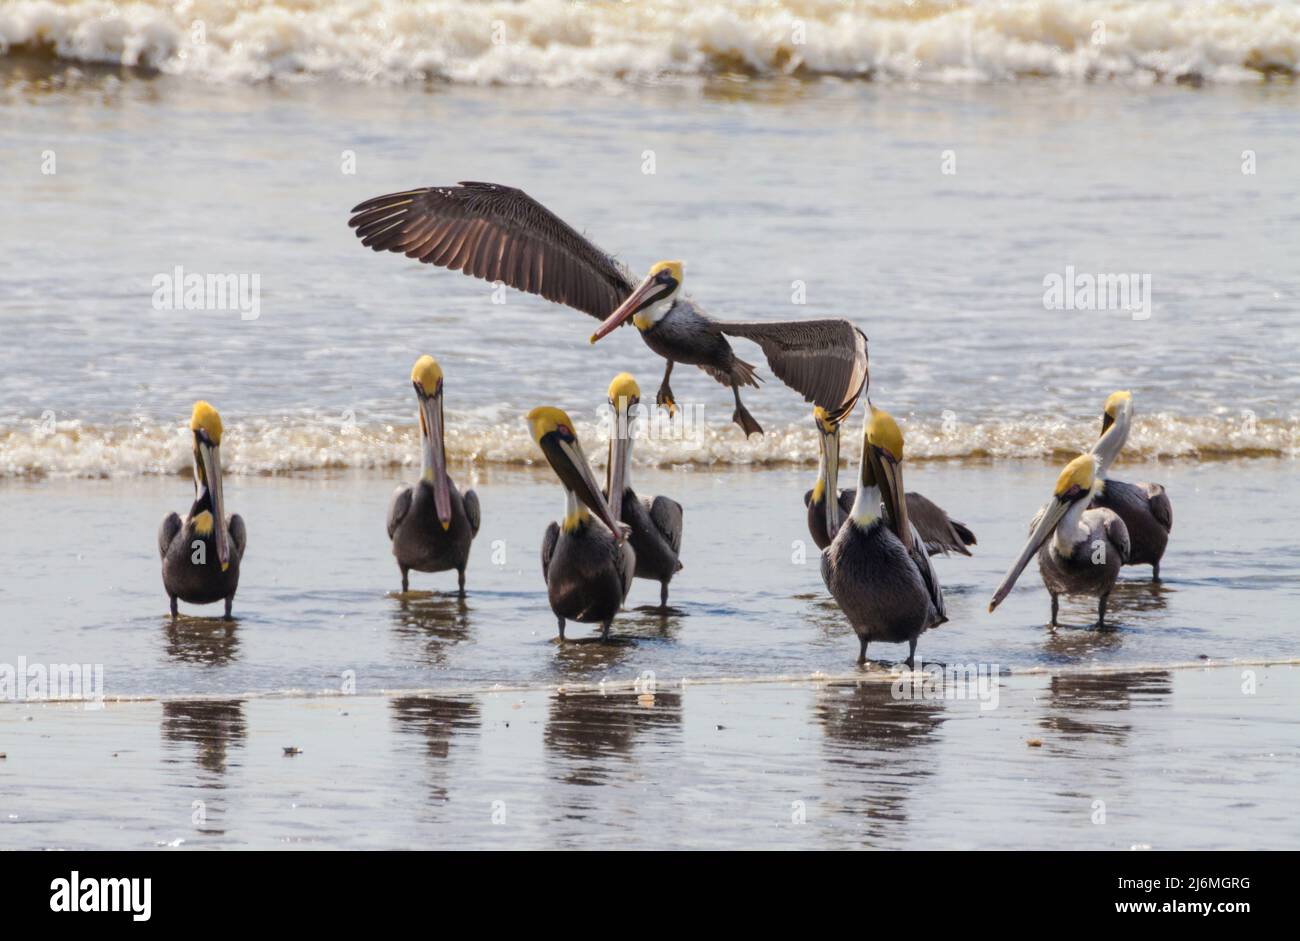 Brown Pelicans on the beach, Pelecanus occidentalis, at Punta Chame, Pacific coast, Panama province, Republic of Panama, Central America. Stock Photo